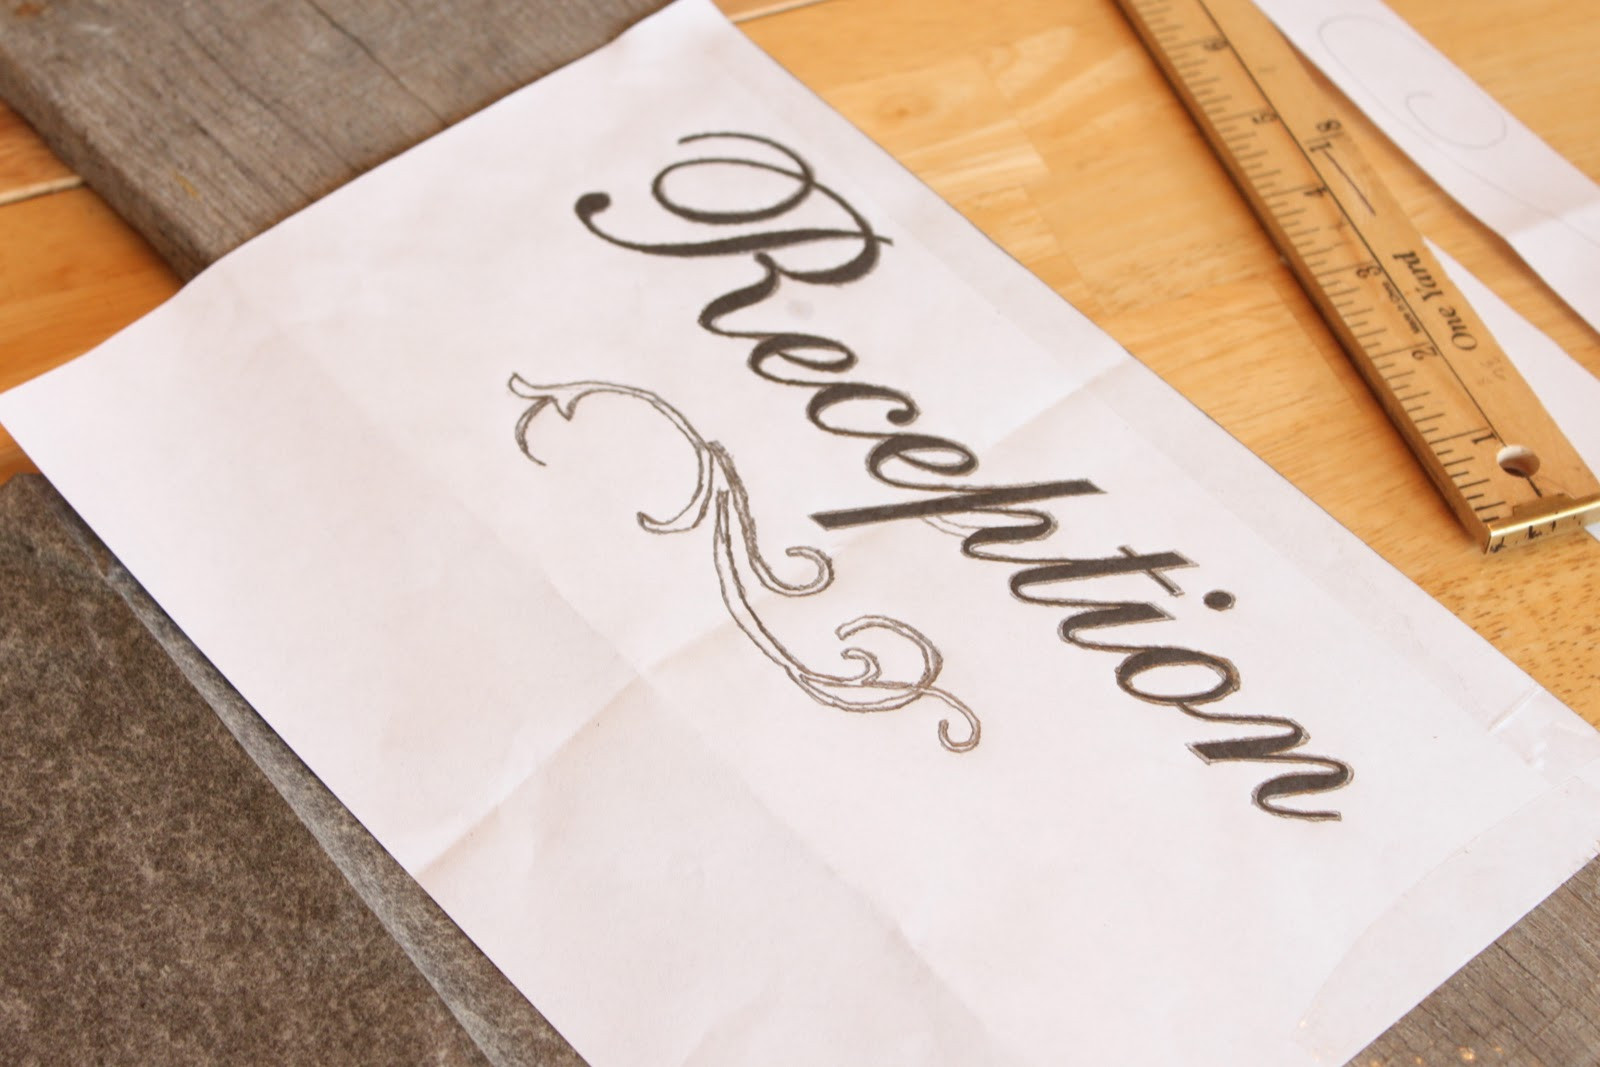 DIY Wood Wedding Signs
 DIY Wooden Wedding Signs Love of Family & Home